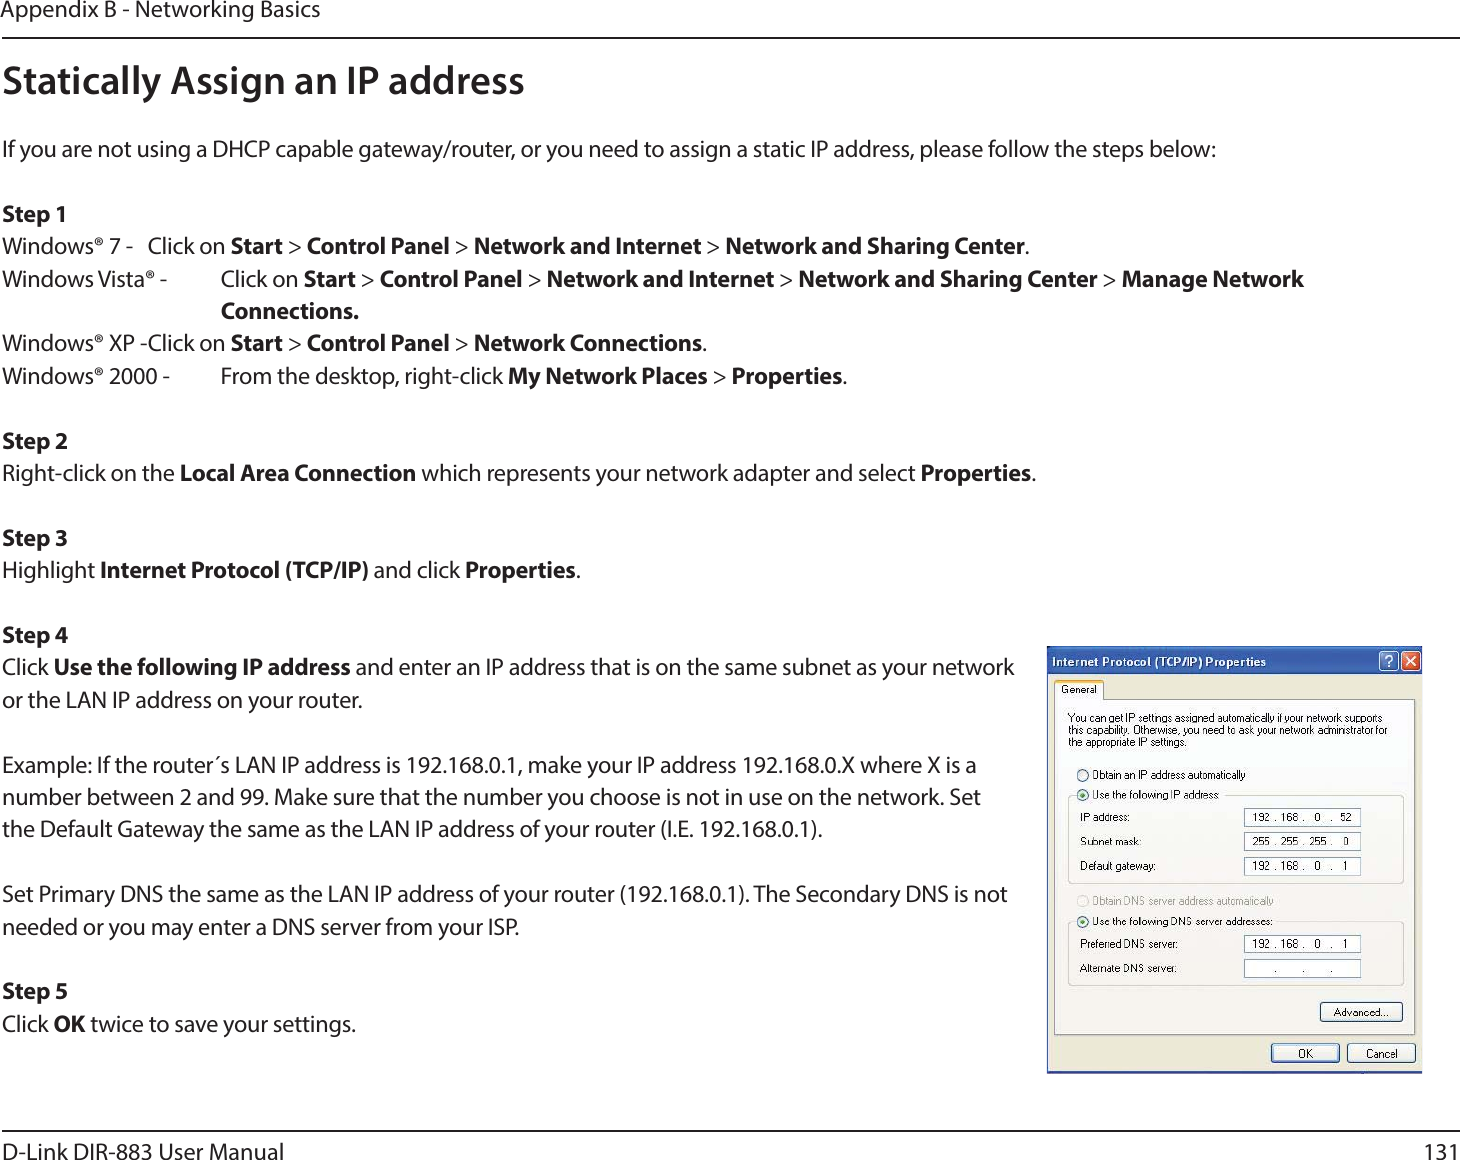 131D-Link DIR-883 User ManualAppendix B - Networking BasicsStatically Assign an IP addressIf you are not using a DHCP capable gateway/router, or you need to assign a static IP address, please follow the steps below:Step 1Windows® 7 -  Click on Start &gt; Control Panel &gt; Network and Internet &gt; Network and Sharing Center.Windows Vista® -  Click on Start &gt; Control Panel &gt; Network and Internet &gt; Network and Sharing Center &gt; Manage Network    Connections.Windows® XP - Click on Start &gt; Control Panel &gt; Network Connections.Windows® 2000 -  From the desktop, right-click My Network Places &gt; Properties.Step 2Right-click on the Local Area Connection which represents your network adapter and select Properties.Step 3Highlight Internet Protocol (TCP/IP) and click Properties.Step 4Click Use the following IP address and enter an IP address that is on the same subnet as your network or the LAN IP address on your router. Example: If the router´s LAN IP address is 192.168.0.1, make your IP address 192.168.0.X where X is a number between 2 and 99. Make sure that the number you choose is not in use on the network. Set the Default Gateway the same as the LAN IP address of your router (I.E. 192.168.0.1). Set Primary DNS the same as the LAN IP address of your router (192.168.0.1). The Secondary DNS is not needed or you may enter a DNS server from your ISP.Step 5Click OK twice to save your settings.